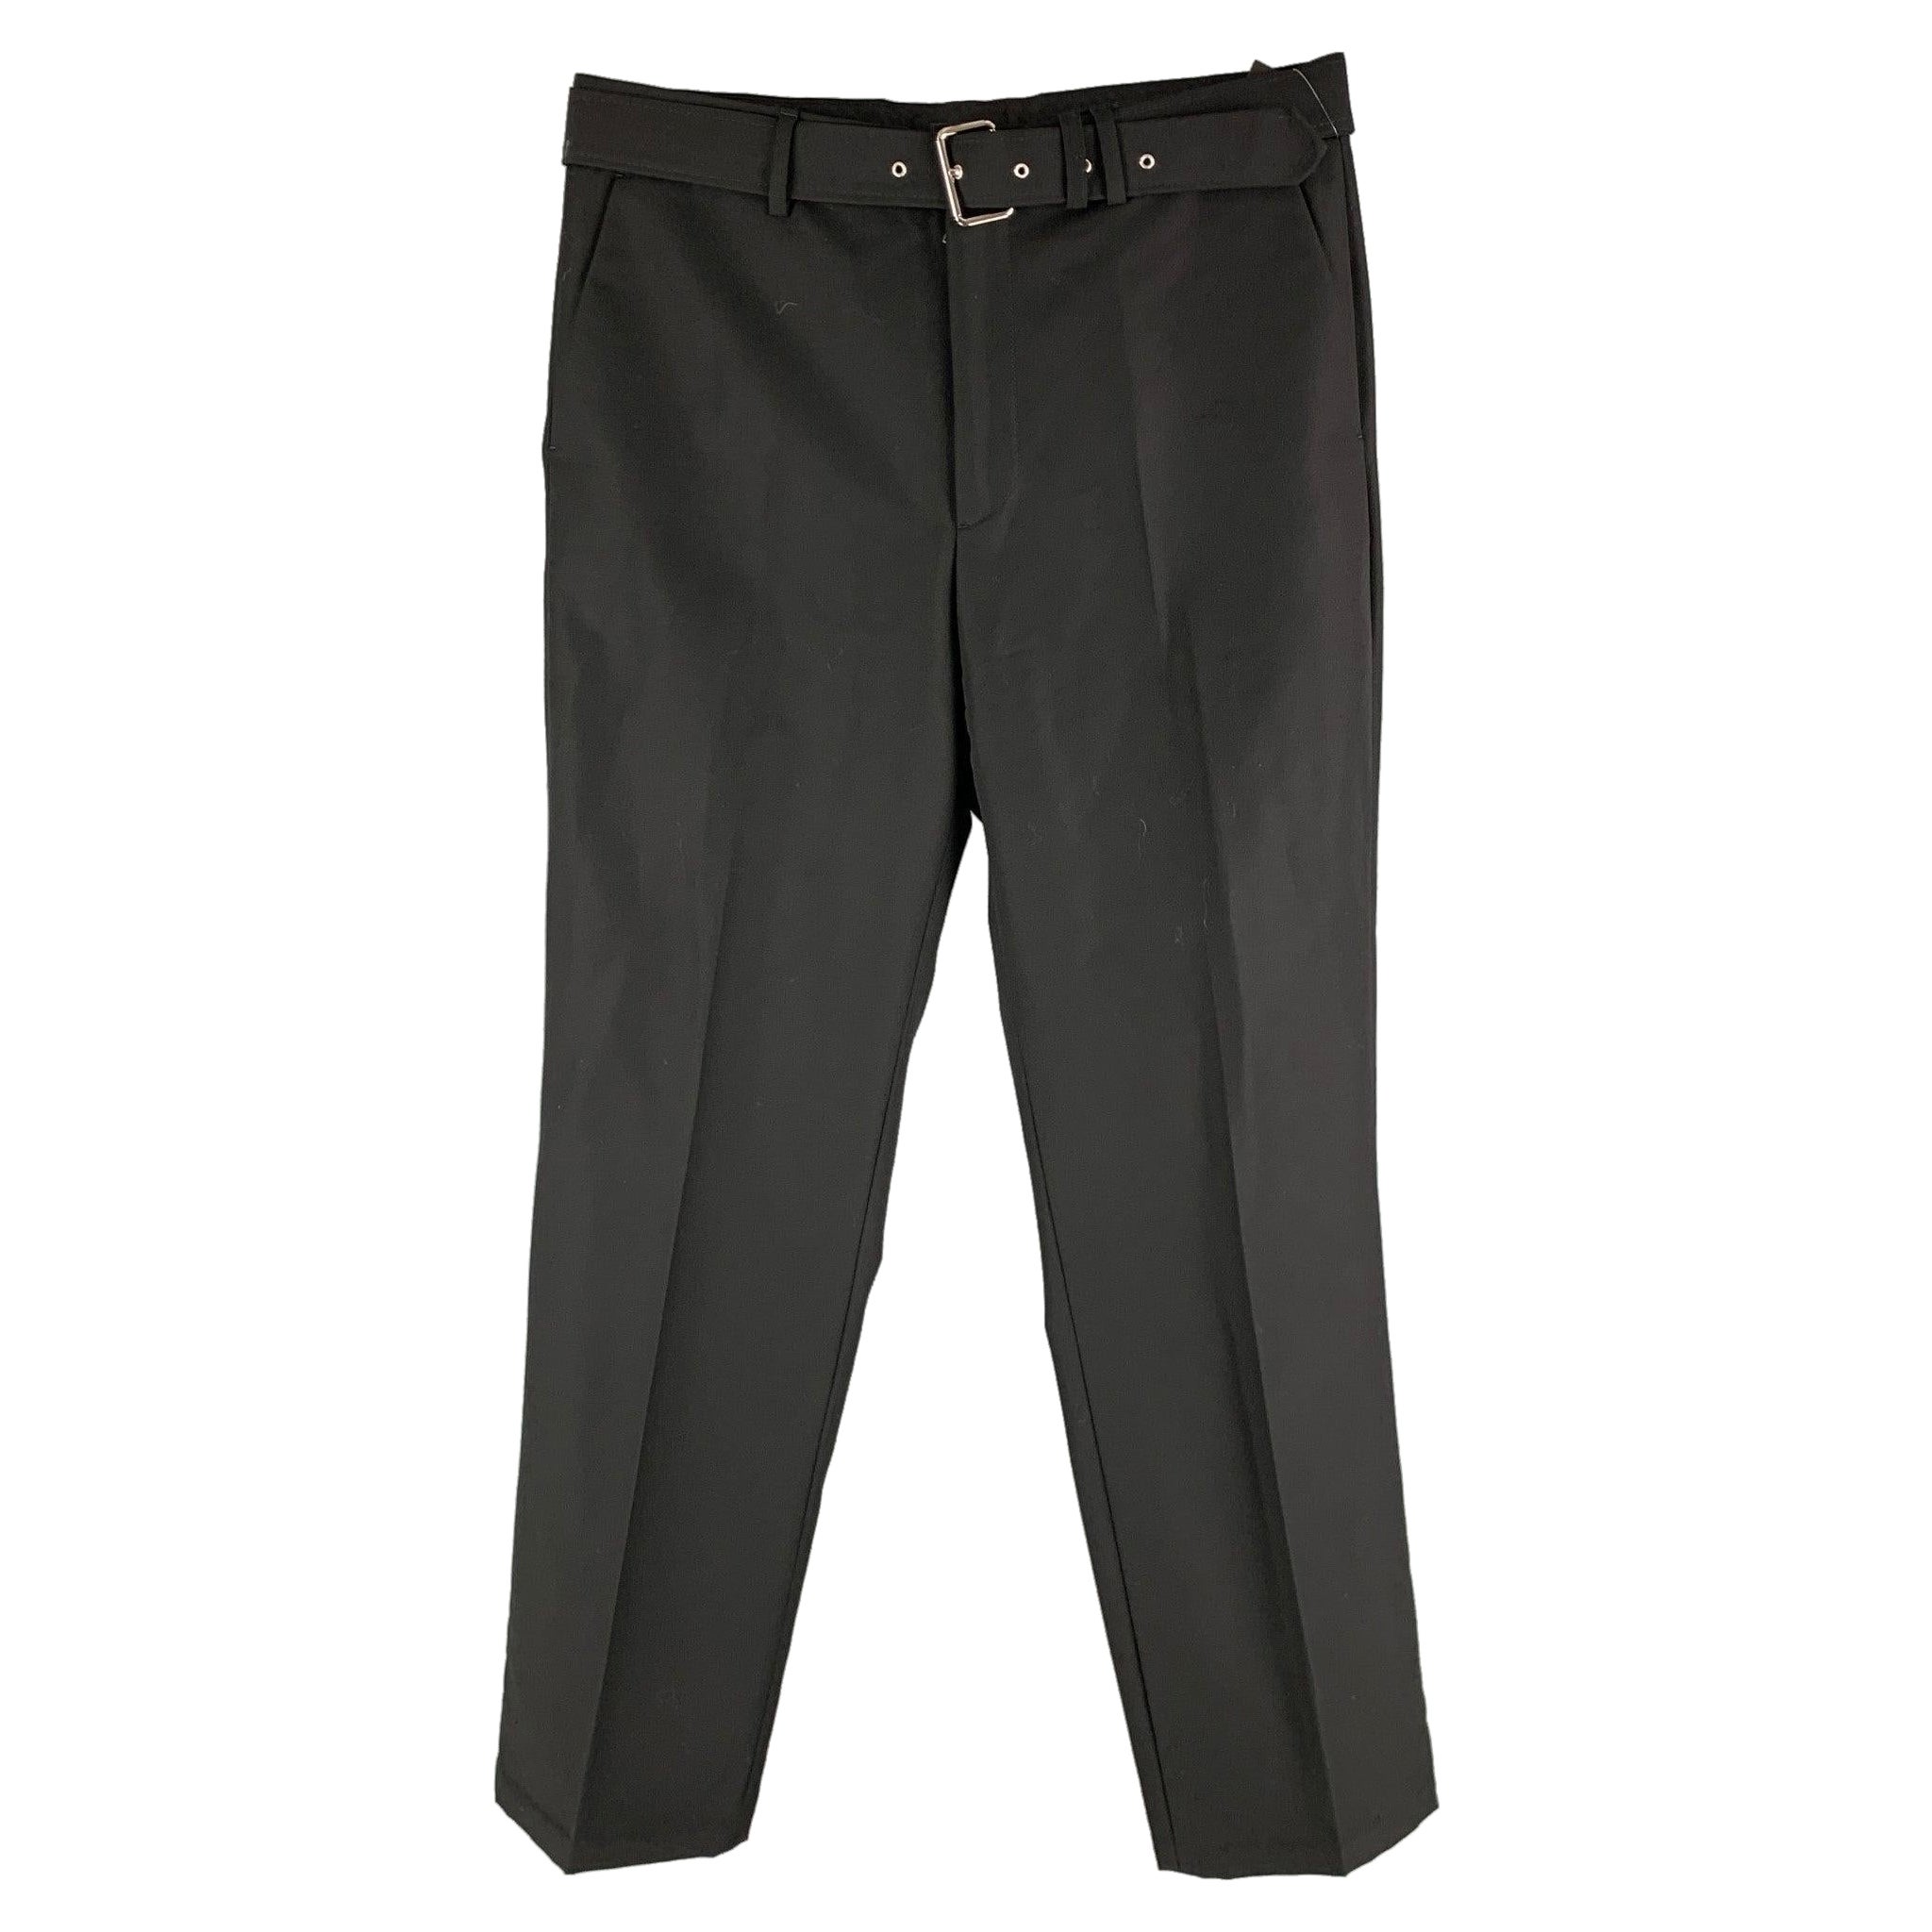 THE KOOPLES Size 32 Black Solid Wool Zip Fly Dress Pants For Sale